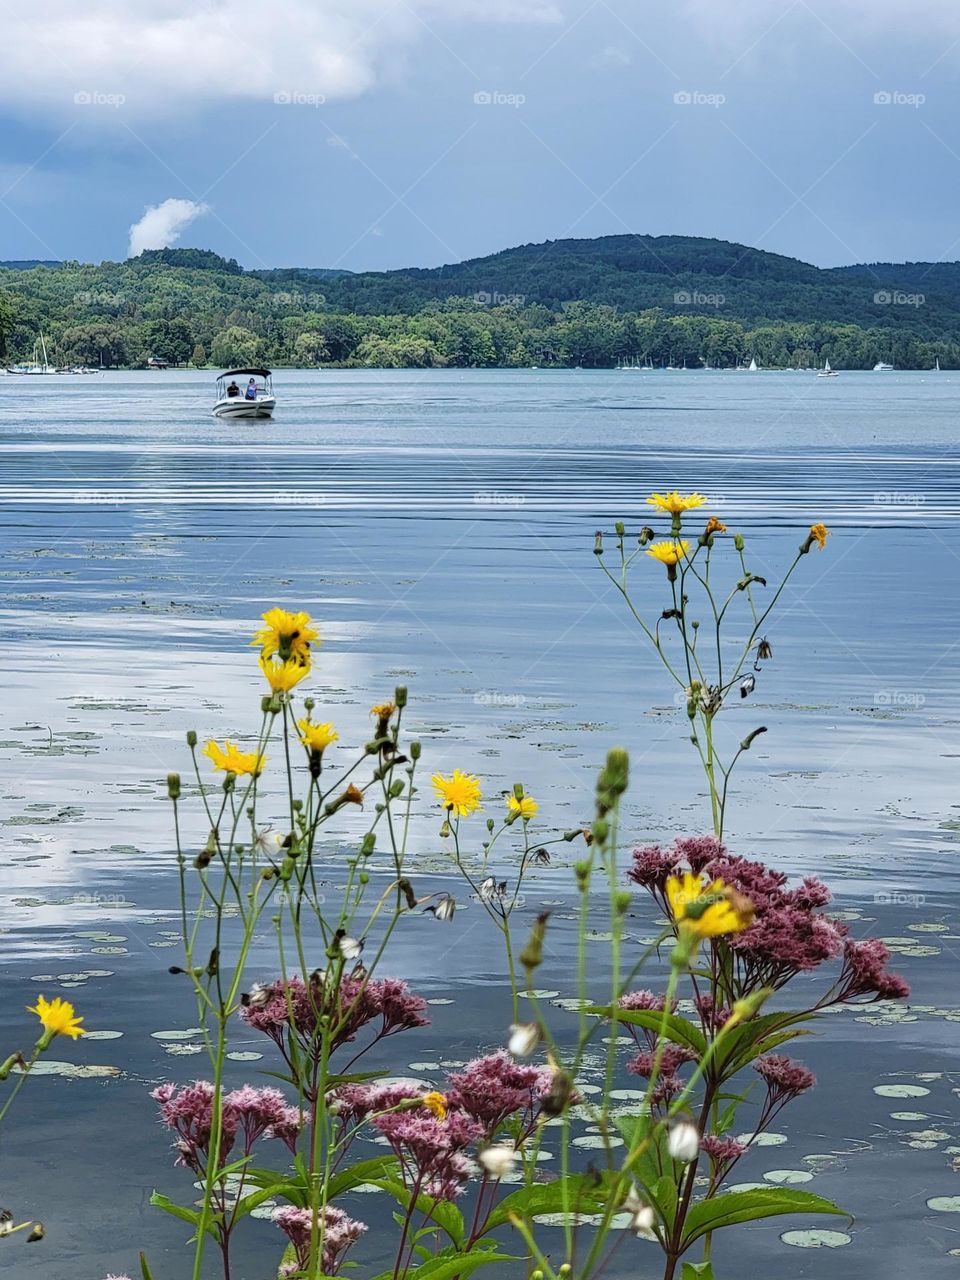 boat on a lake with wildflowers in the foreground